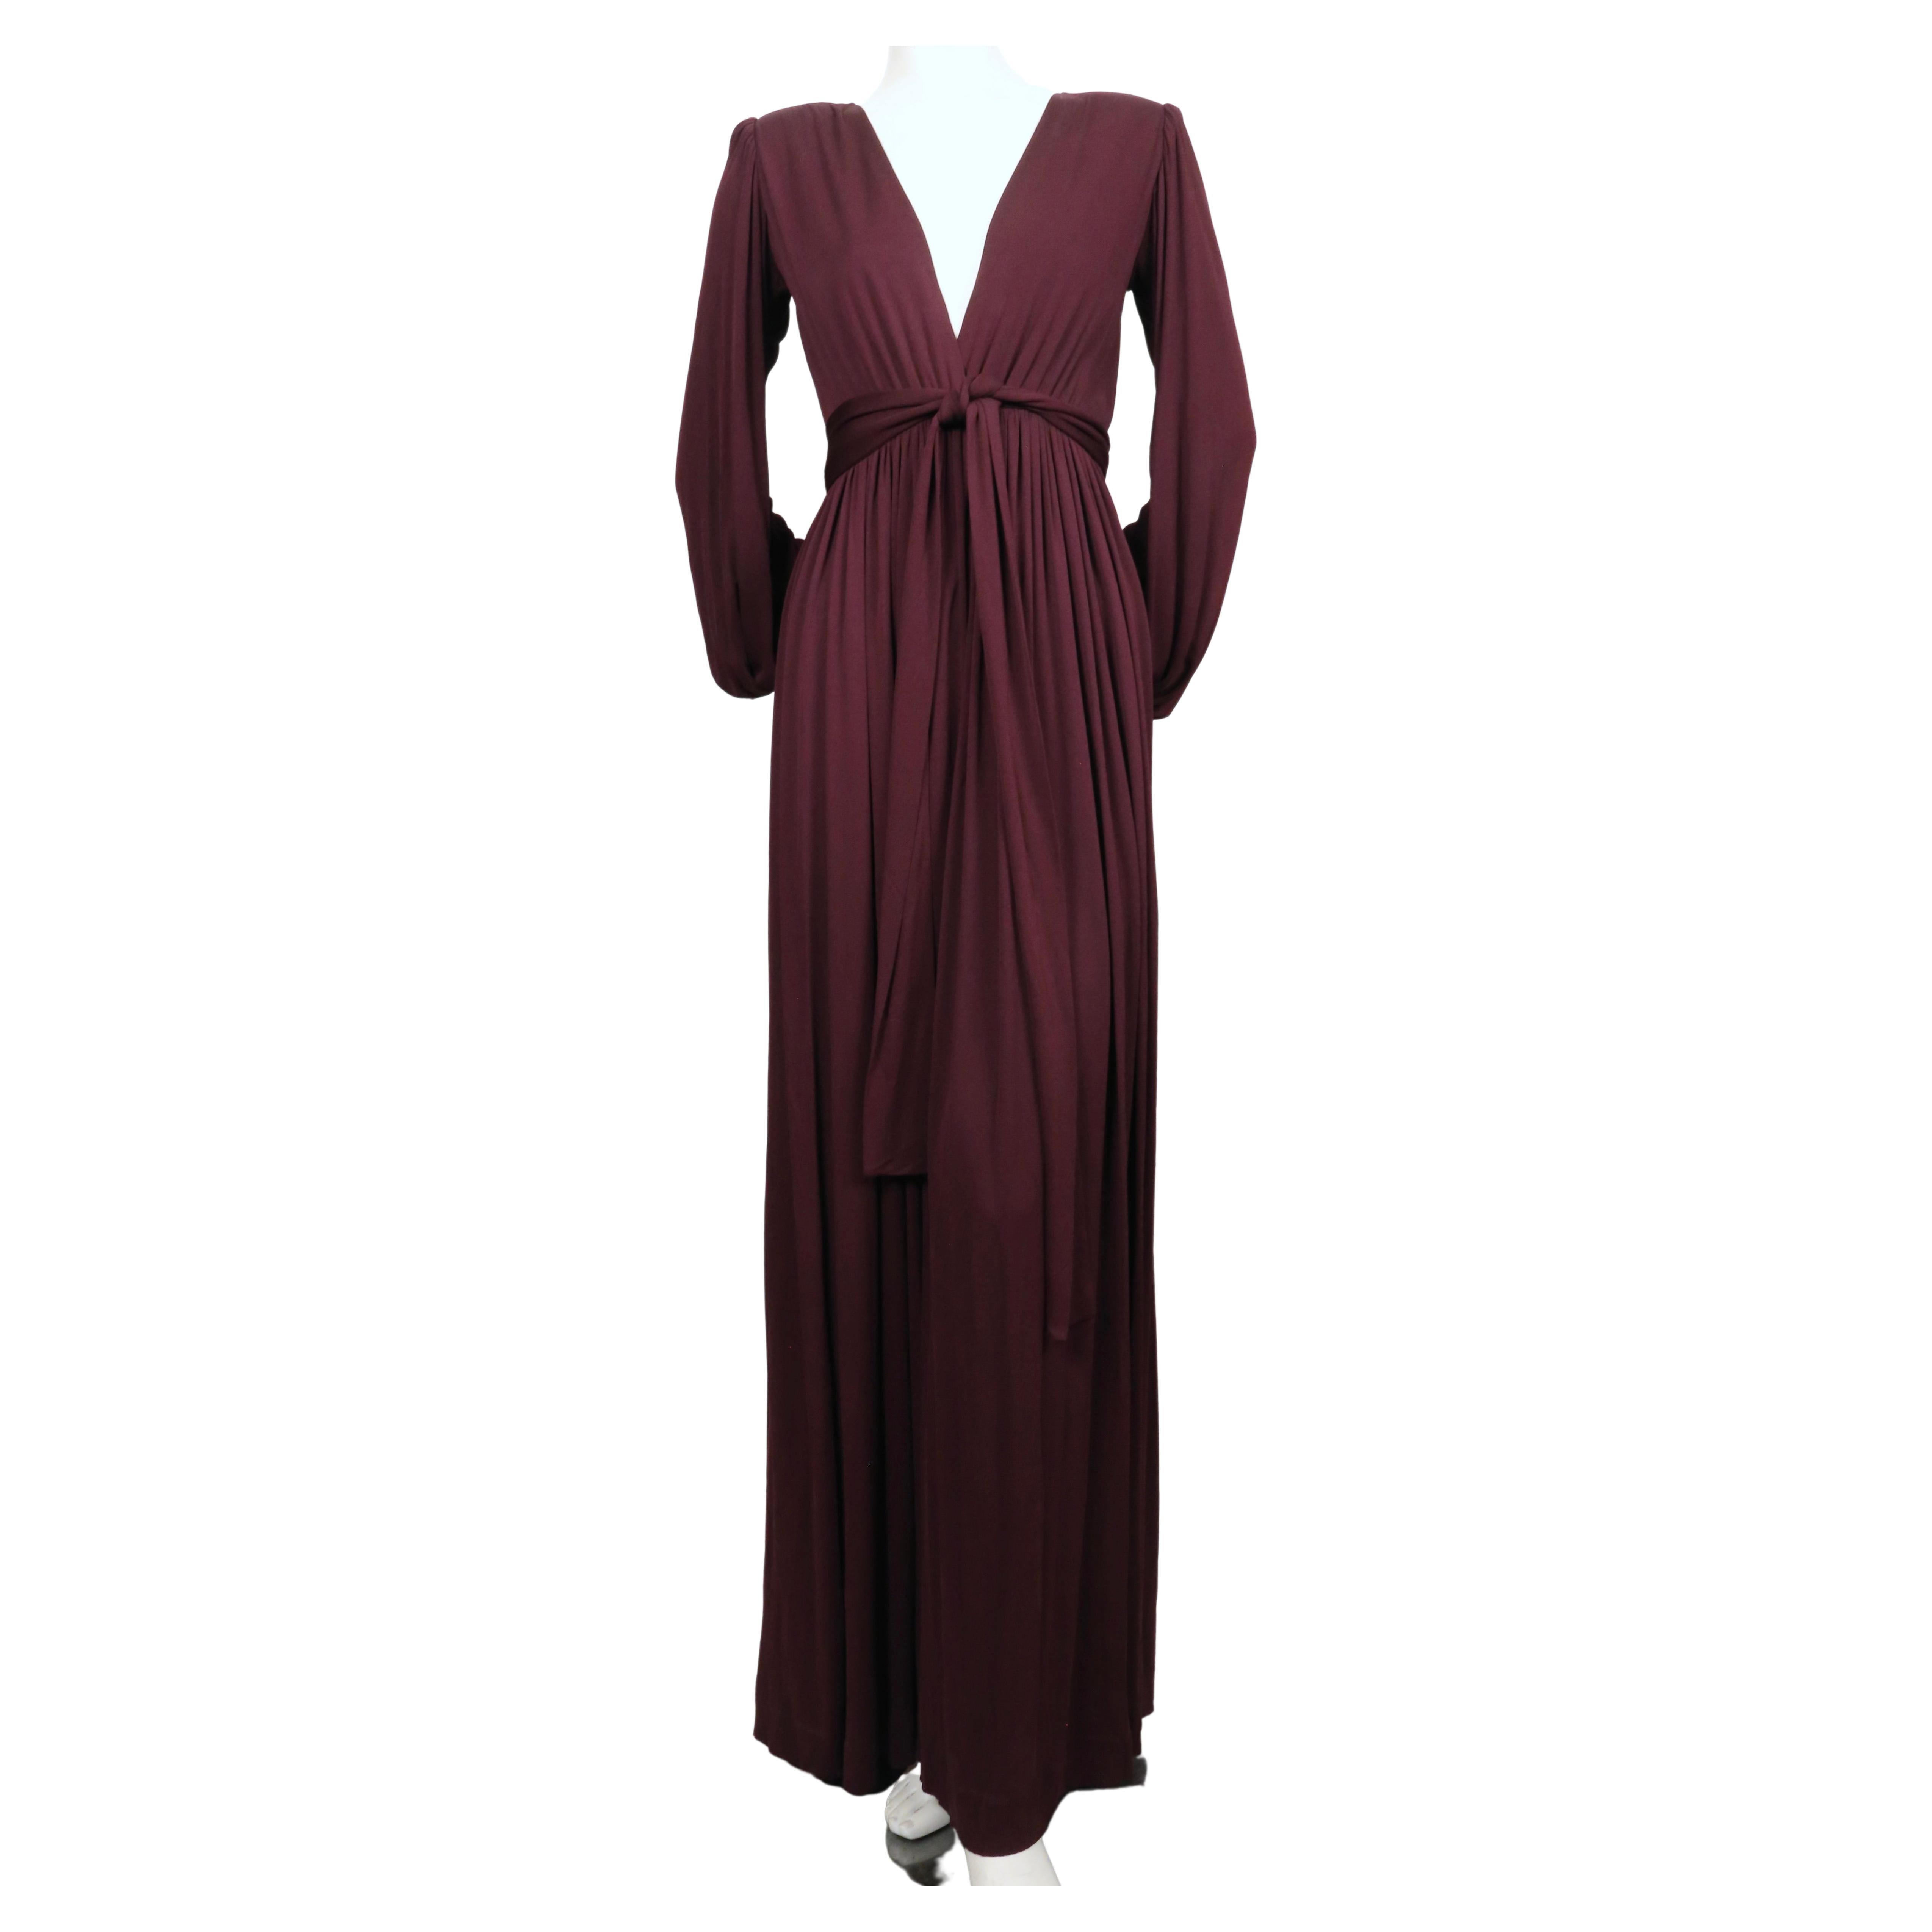 Exceptional, deep-plum jersey gown with deep V neckline, billowy sleeves and wrap belt from Yves Saint Laurent dating to the late 1970's. Labeled a French size 36